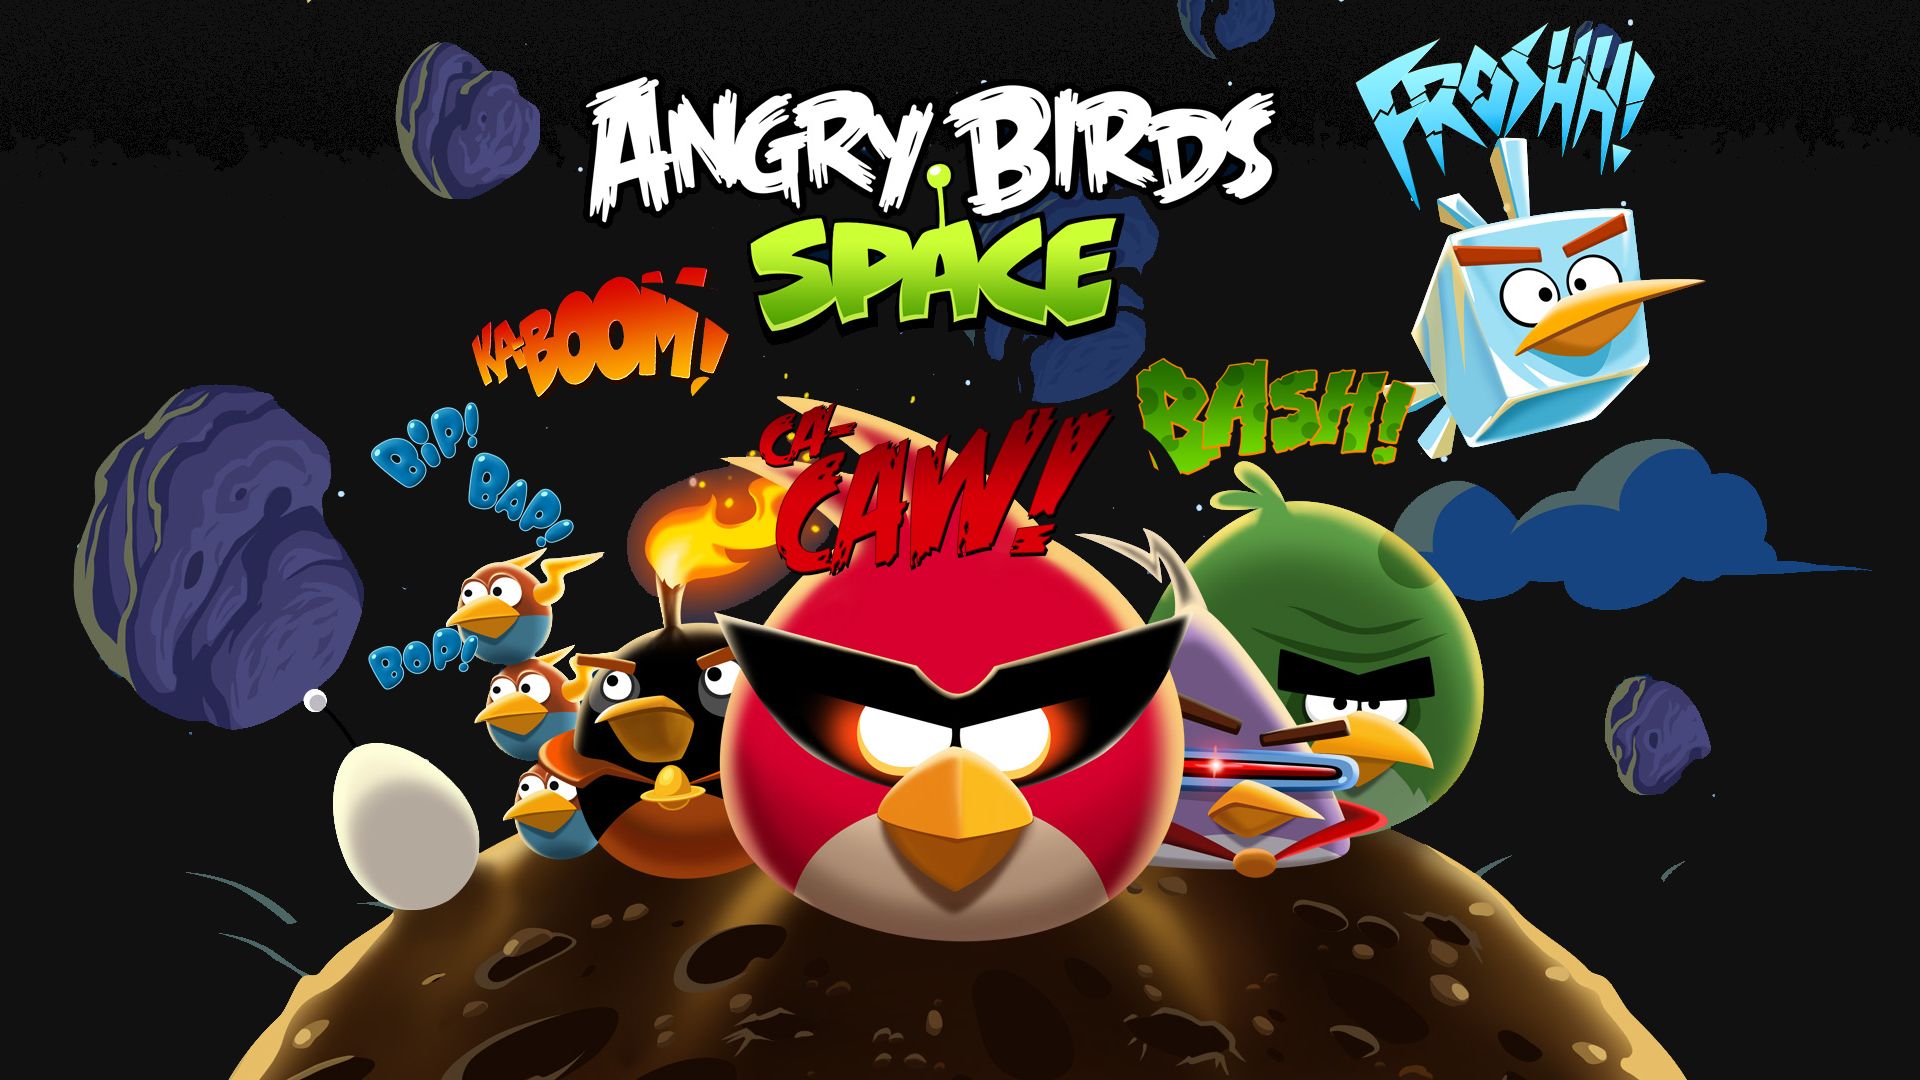 Windows Backgrounds angry birds, video game, angry birds space, bird, game